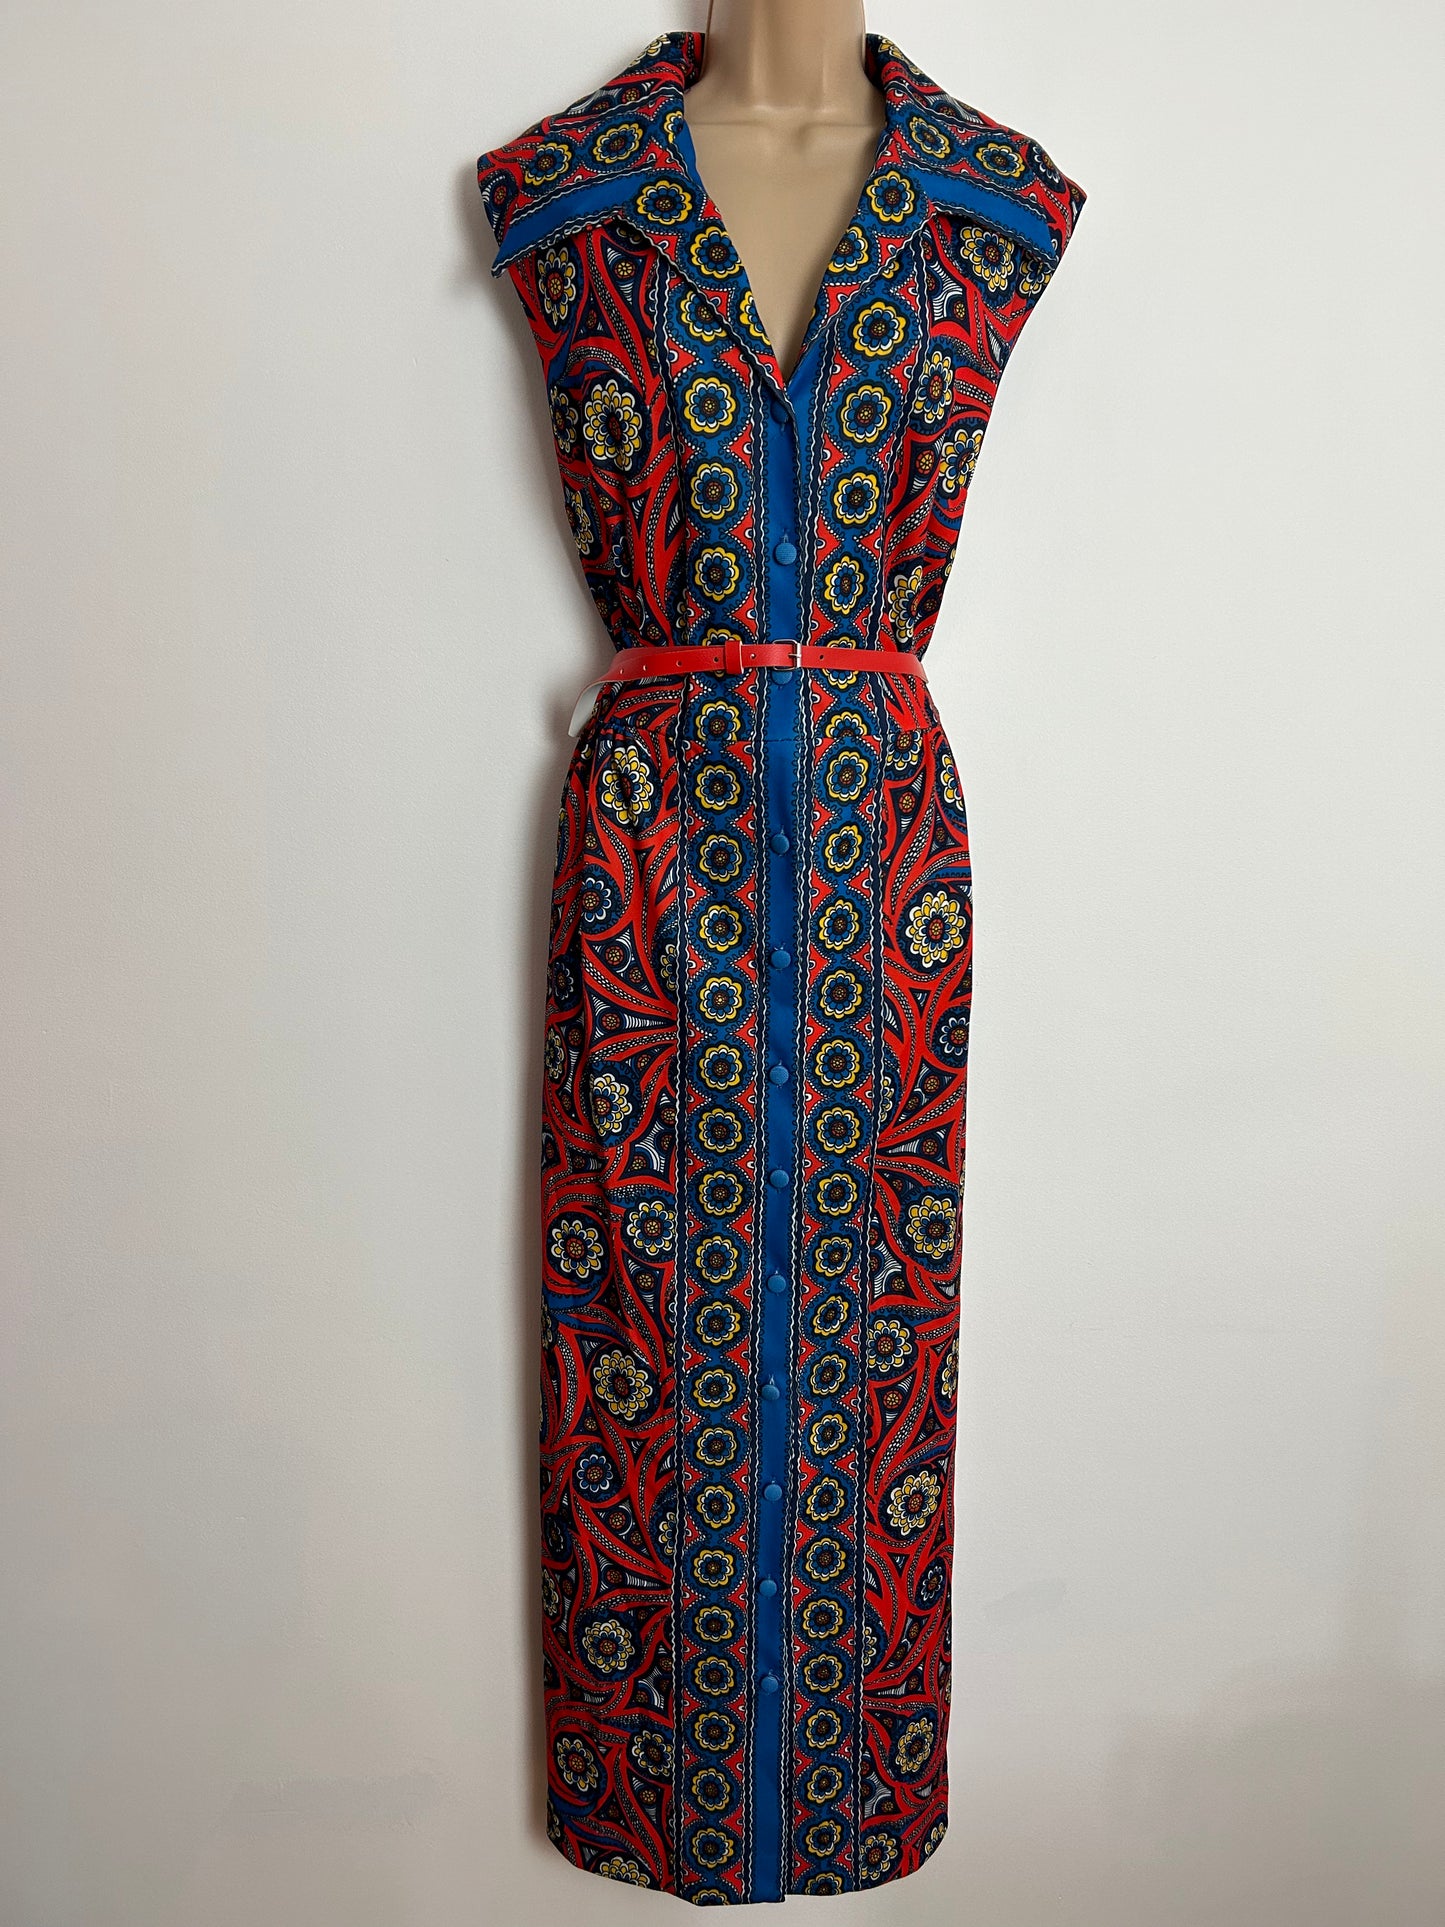 Vintage 1970s UK Size 16 Blue Red & Yellow Abstract Floral Print Wide Collared Column Maxi Dress